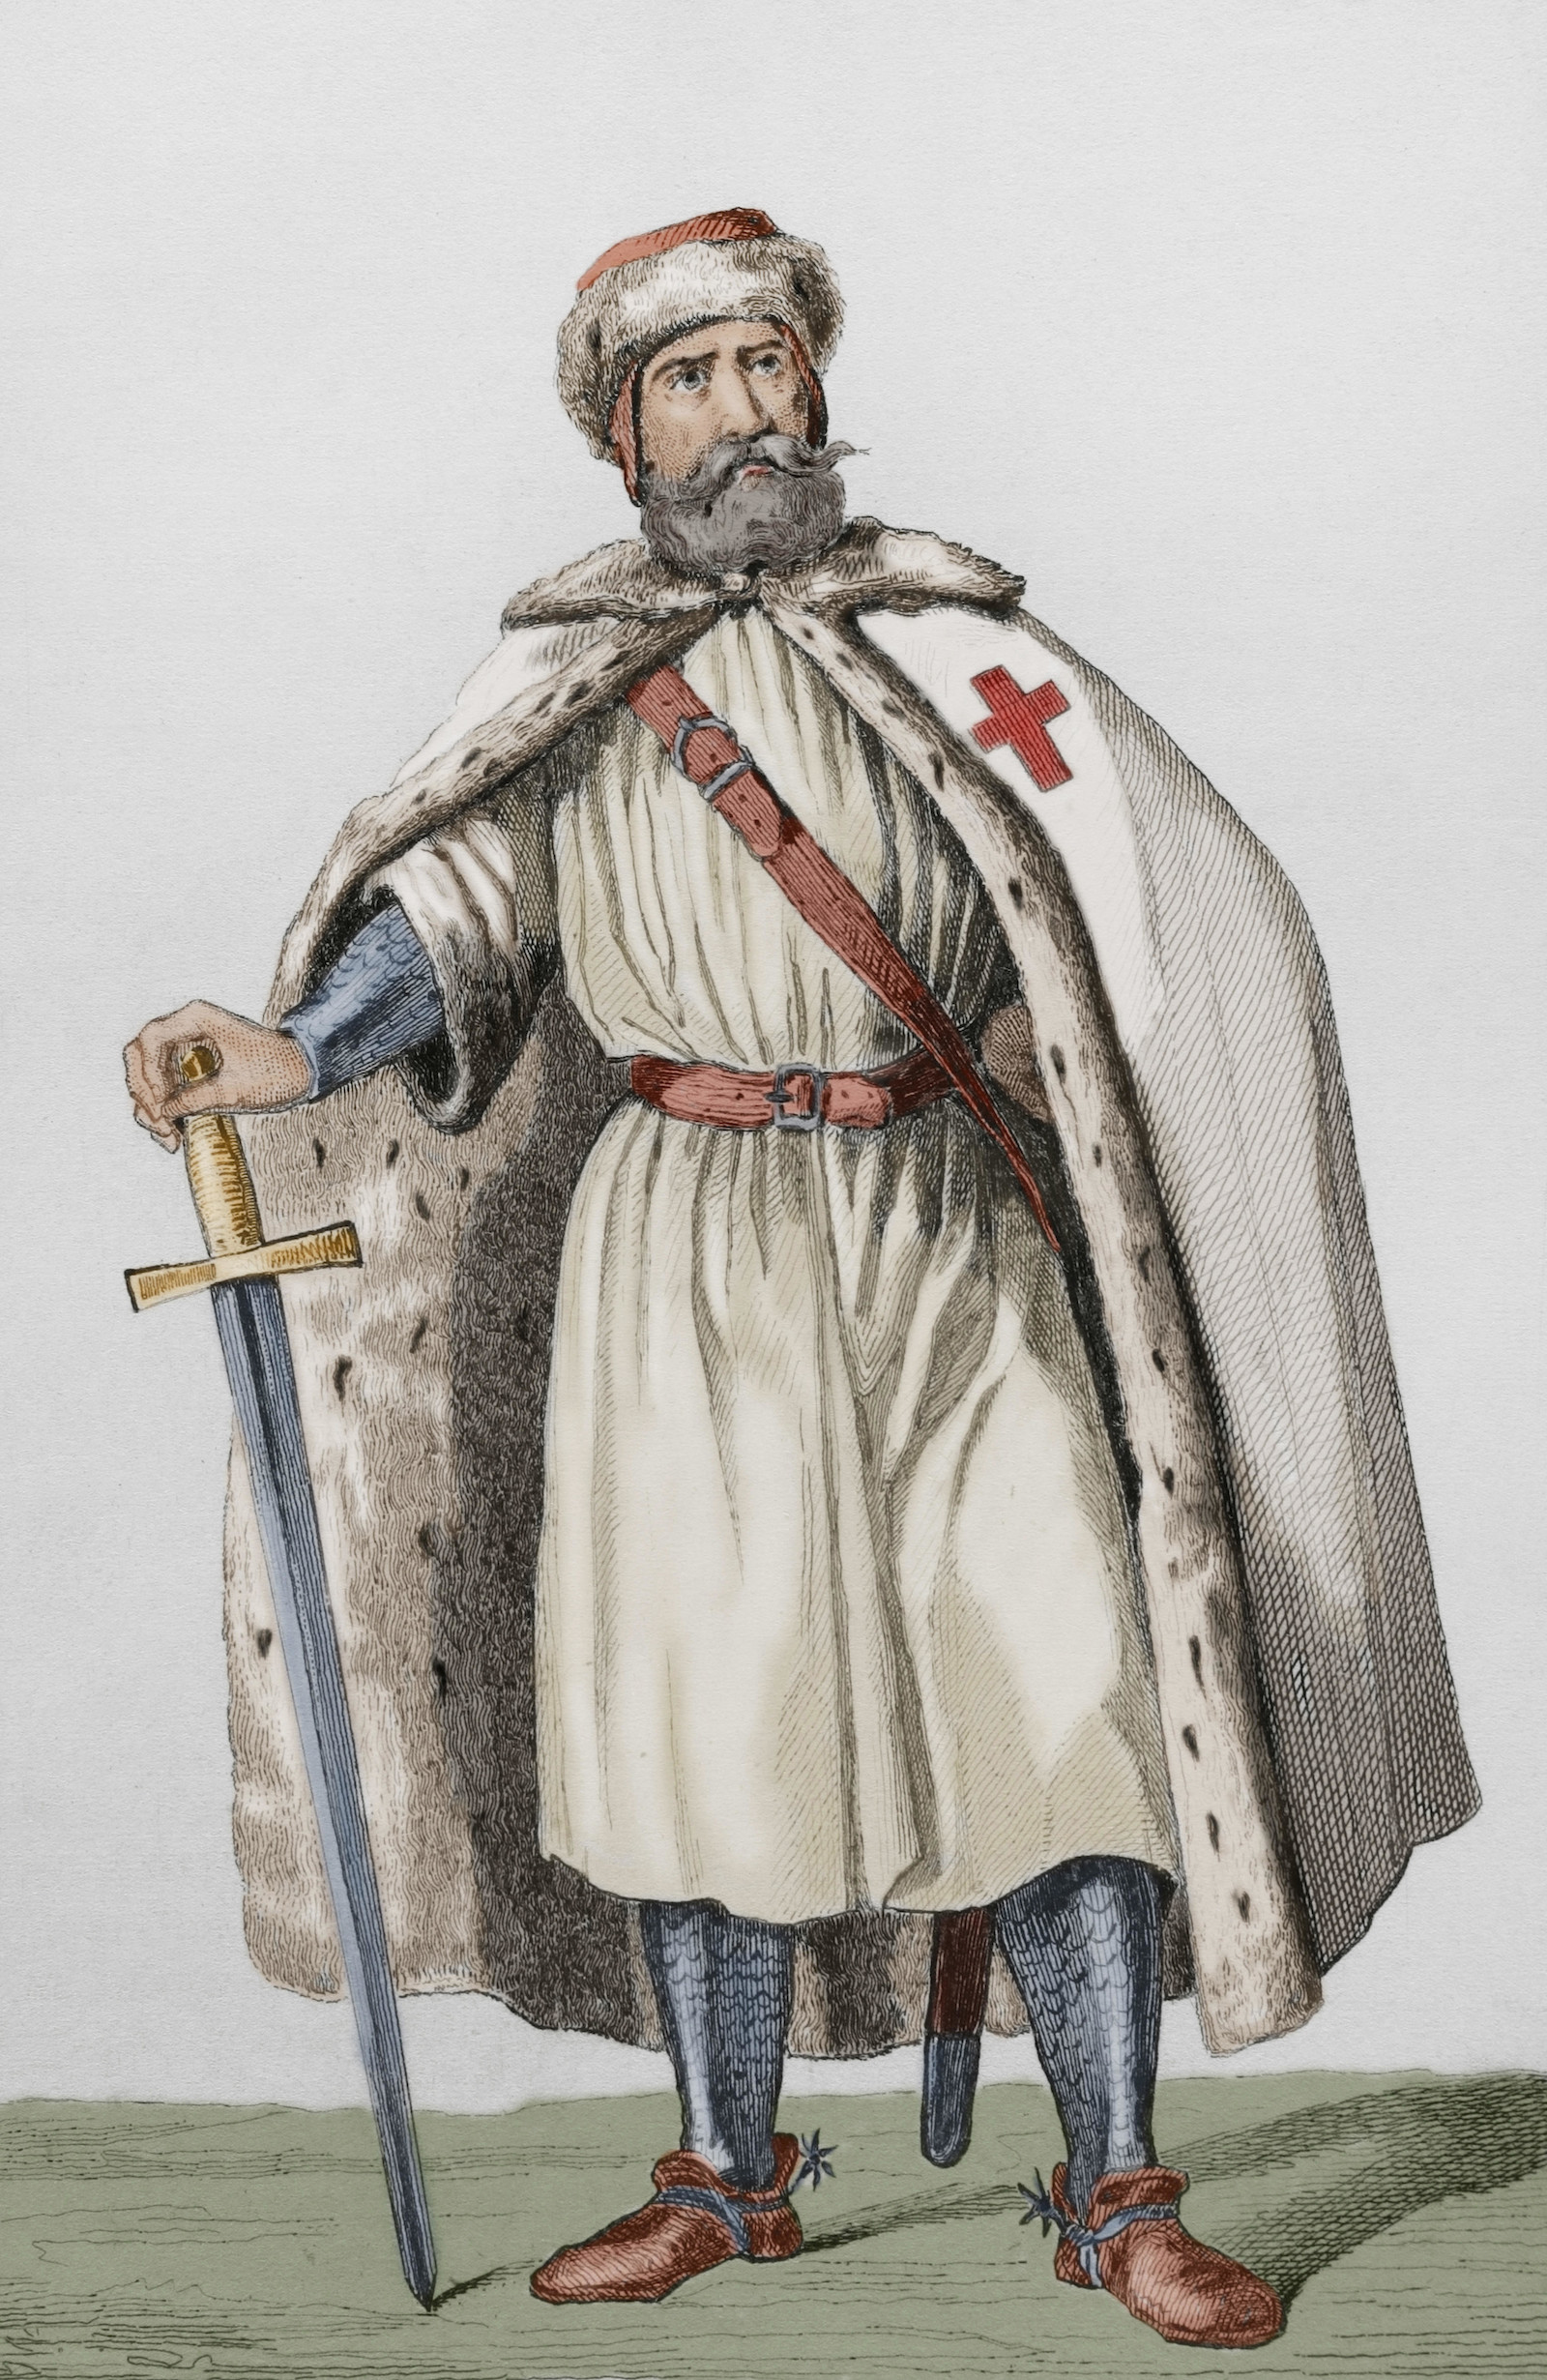 A Livonian ‘Brother of the Sword’, from History of Russia by Jean Marie Chopin, c.1839. Akg-images.